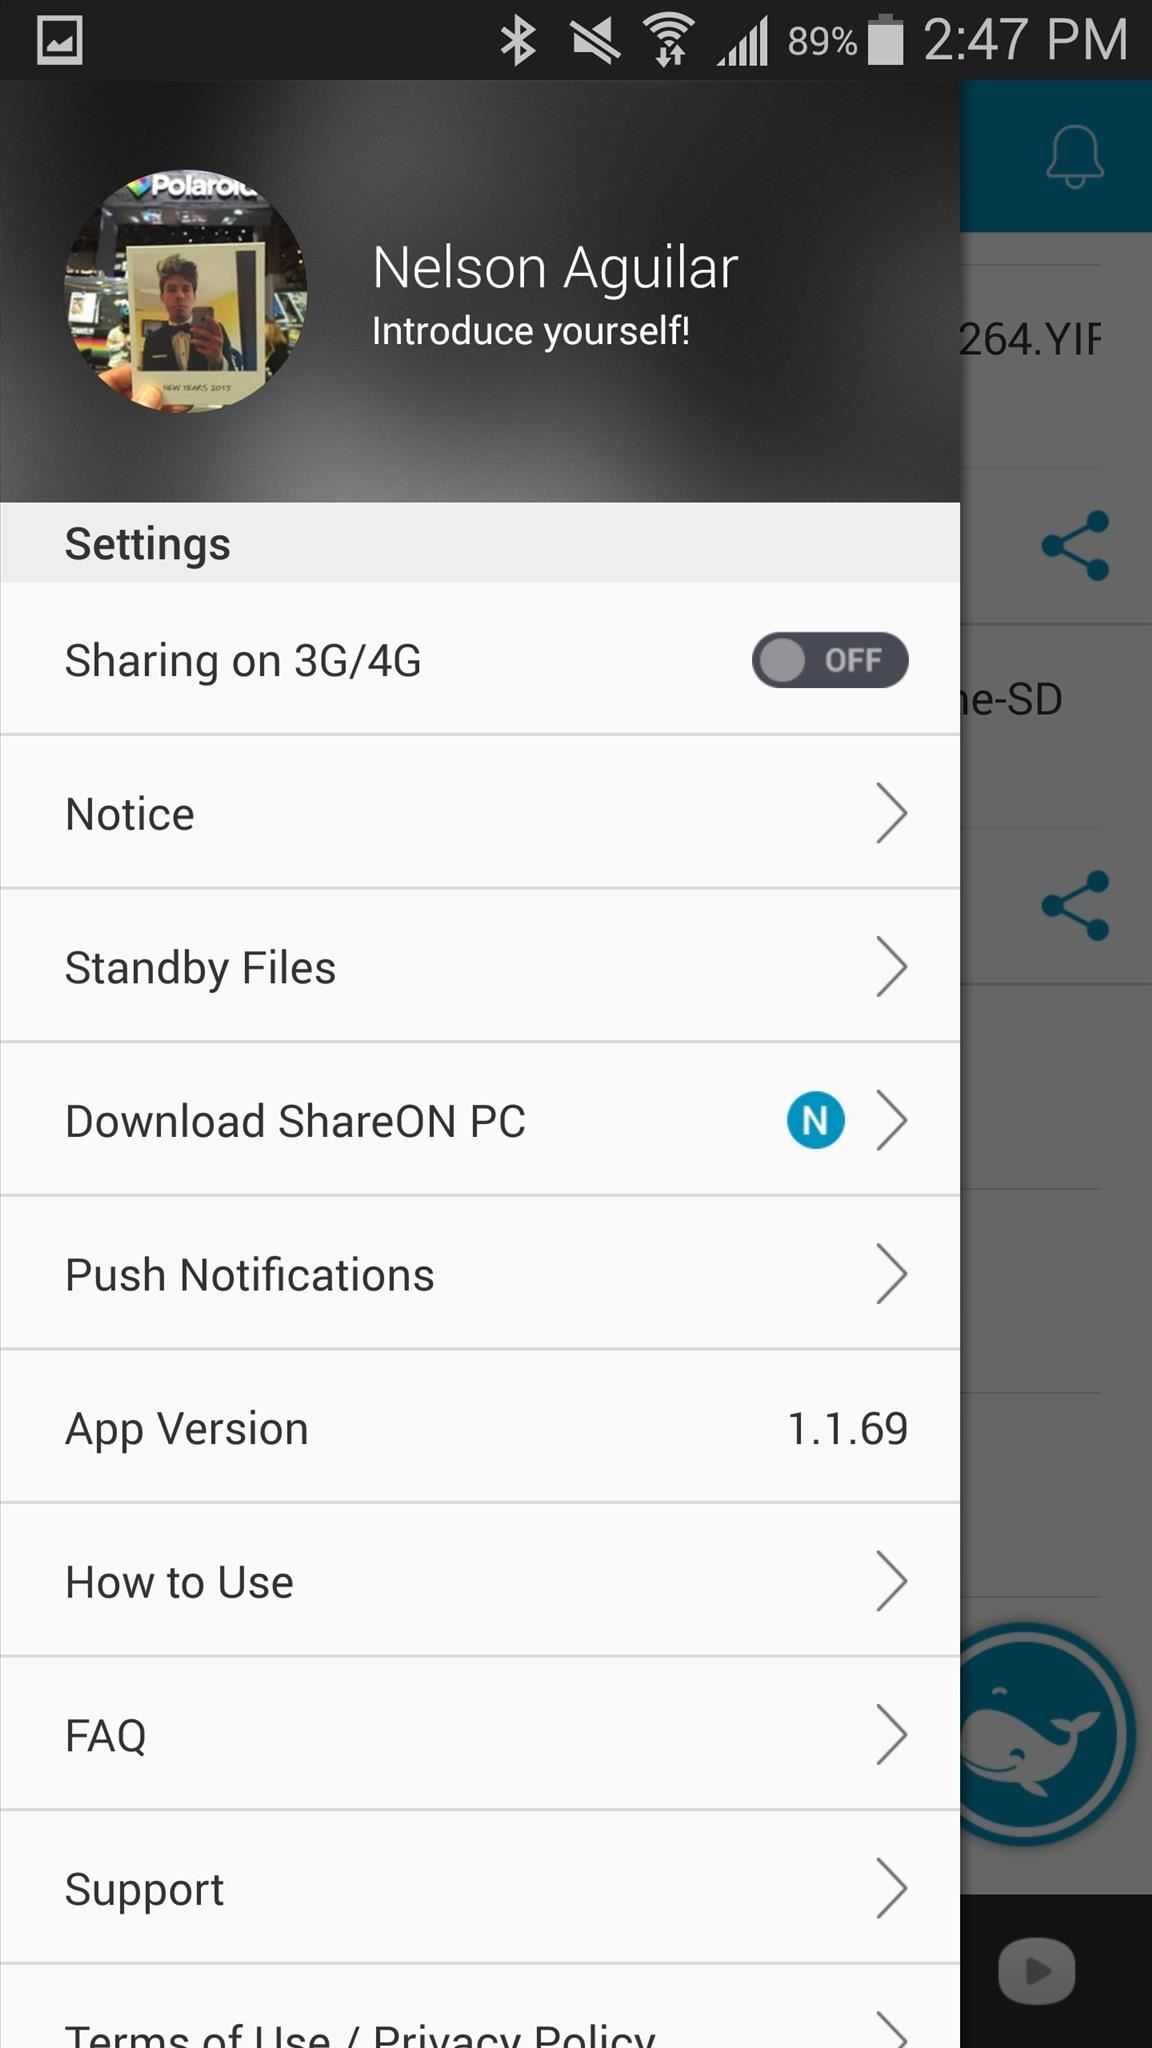 Share Large Files in Seconds on Android, iOS, Windows, & Mac